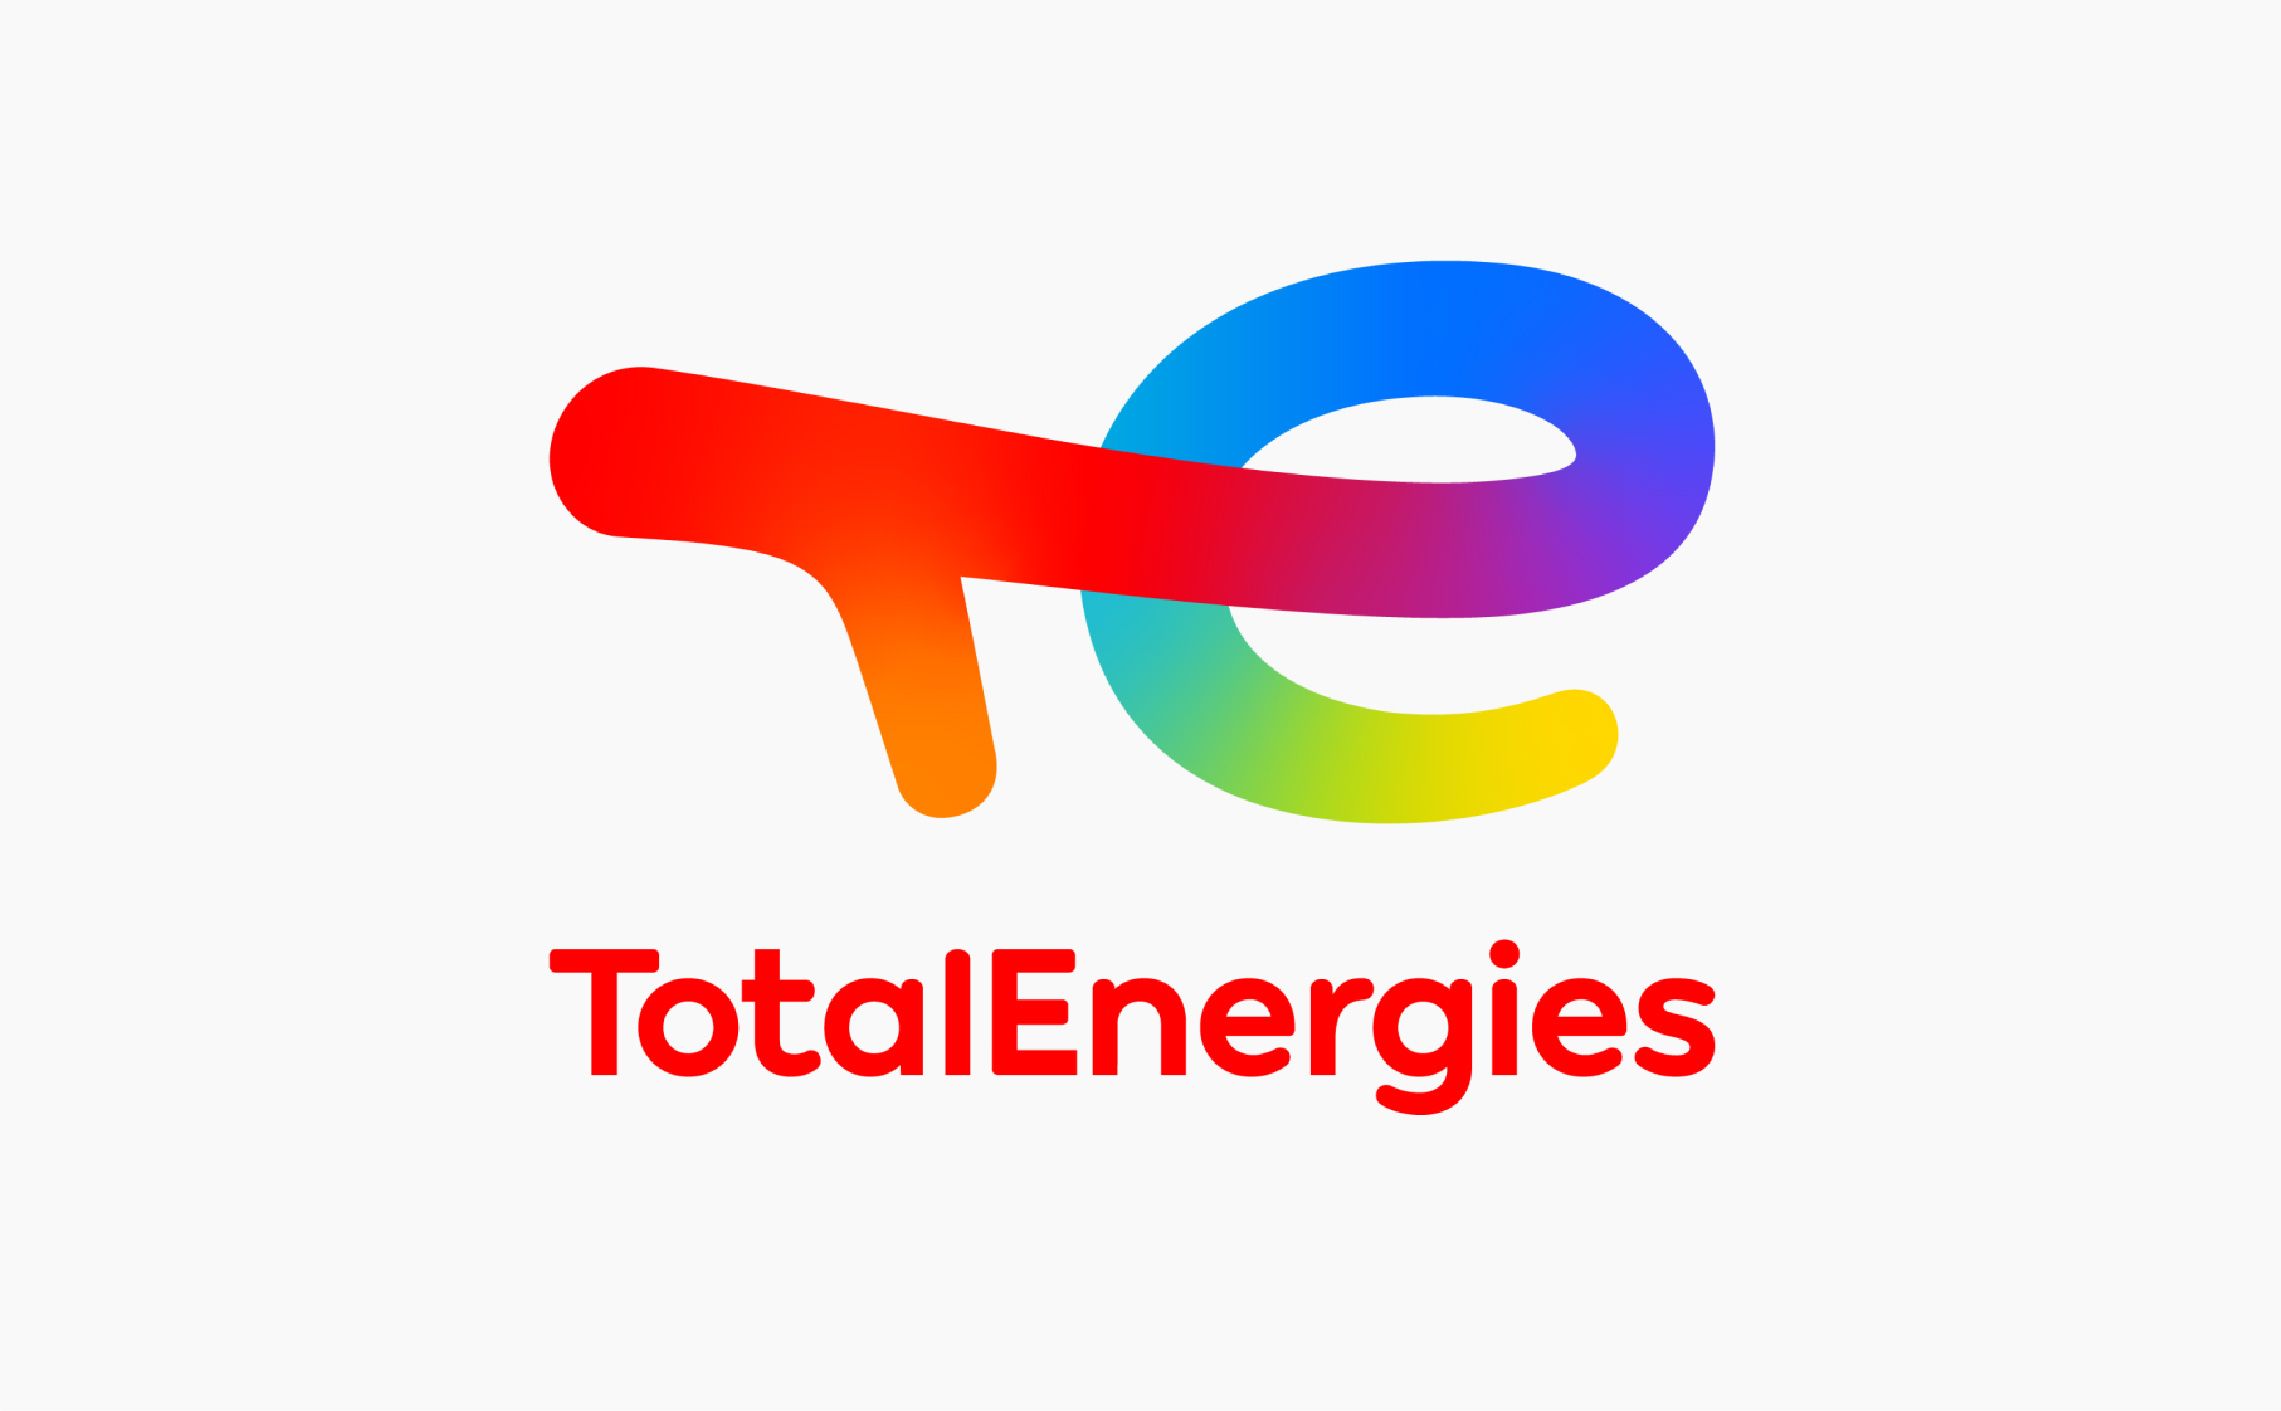 Corporate Total by Thierry Legrand